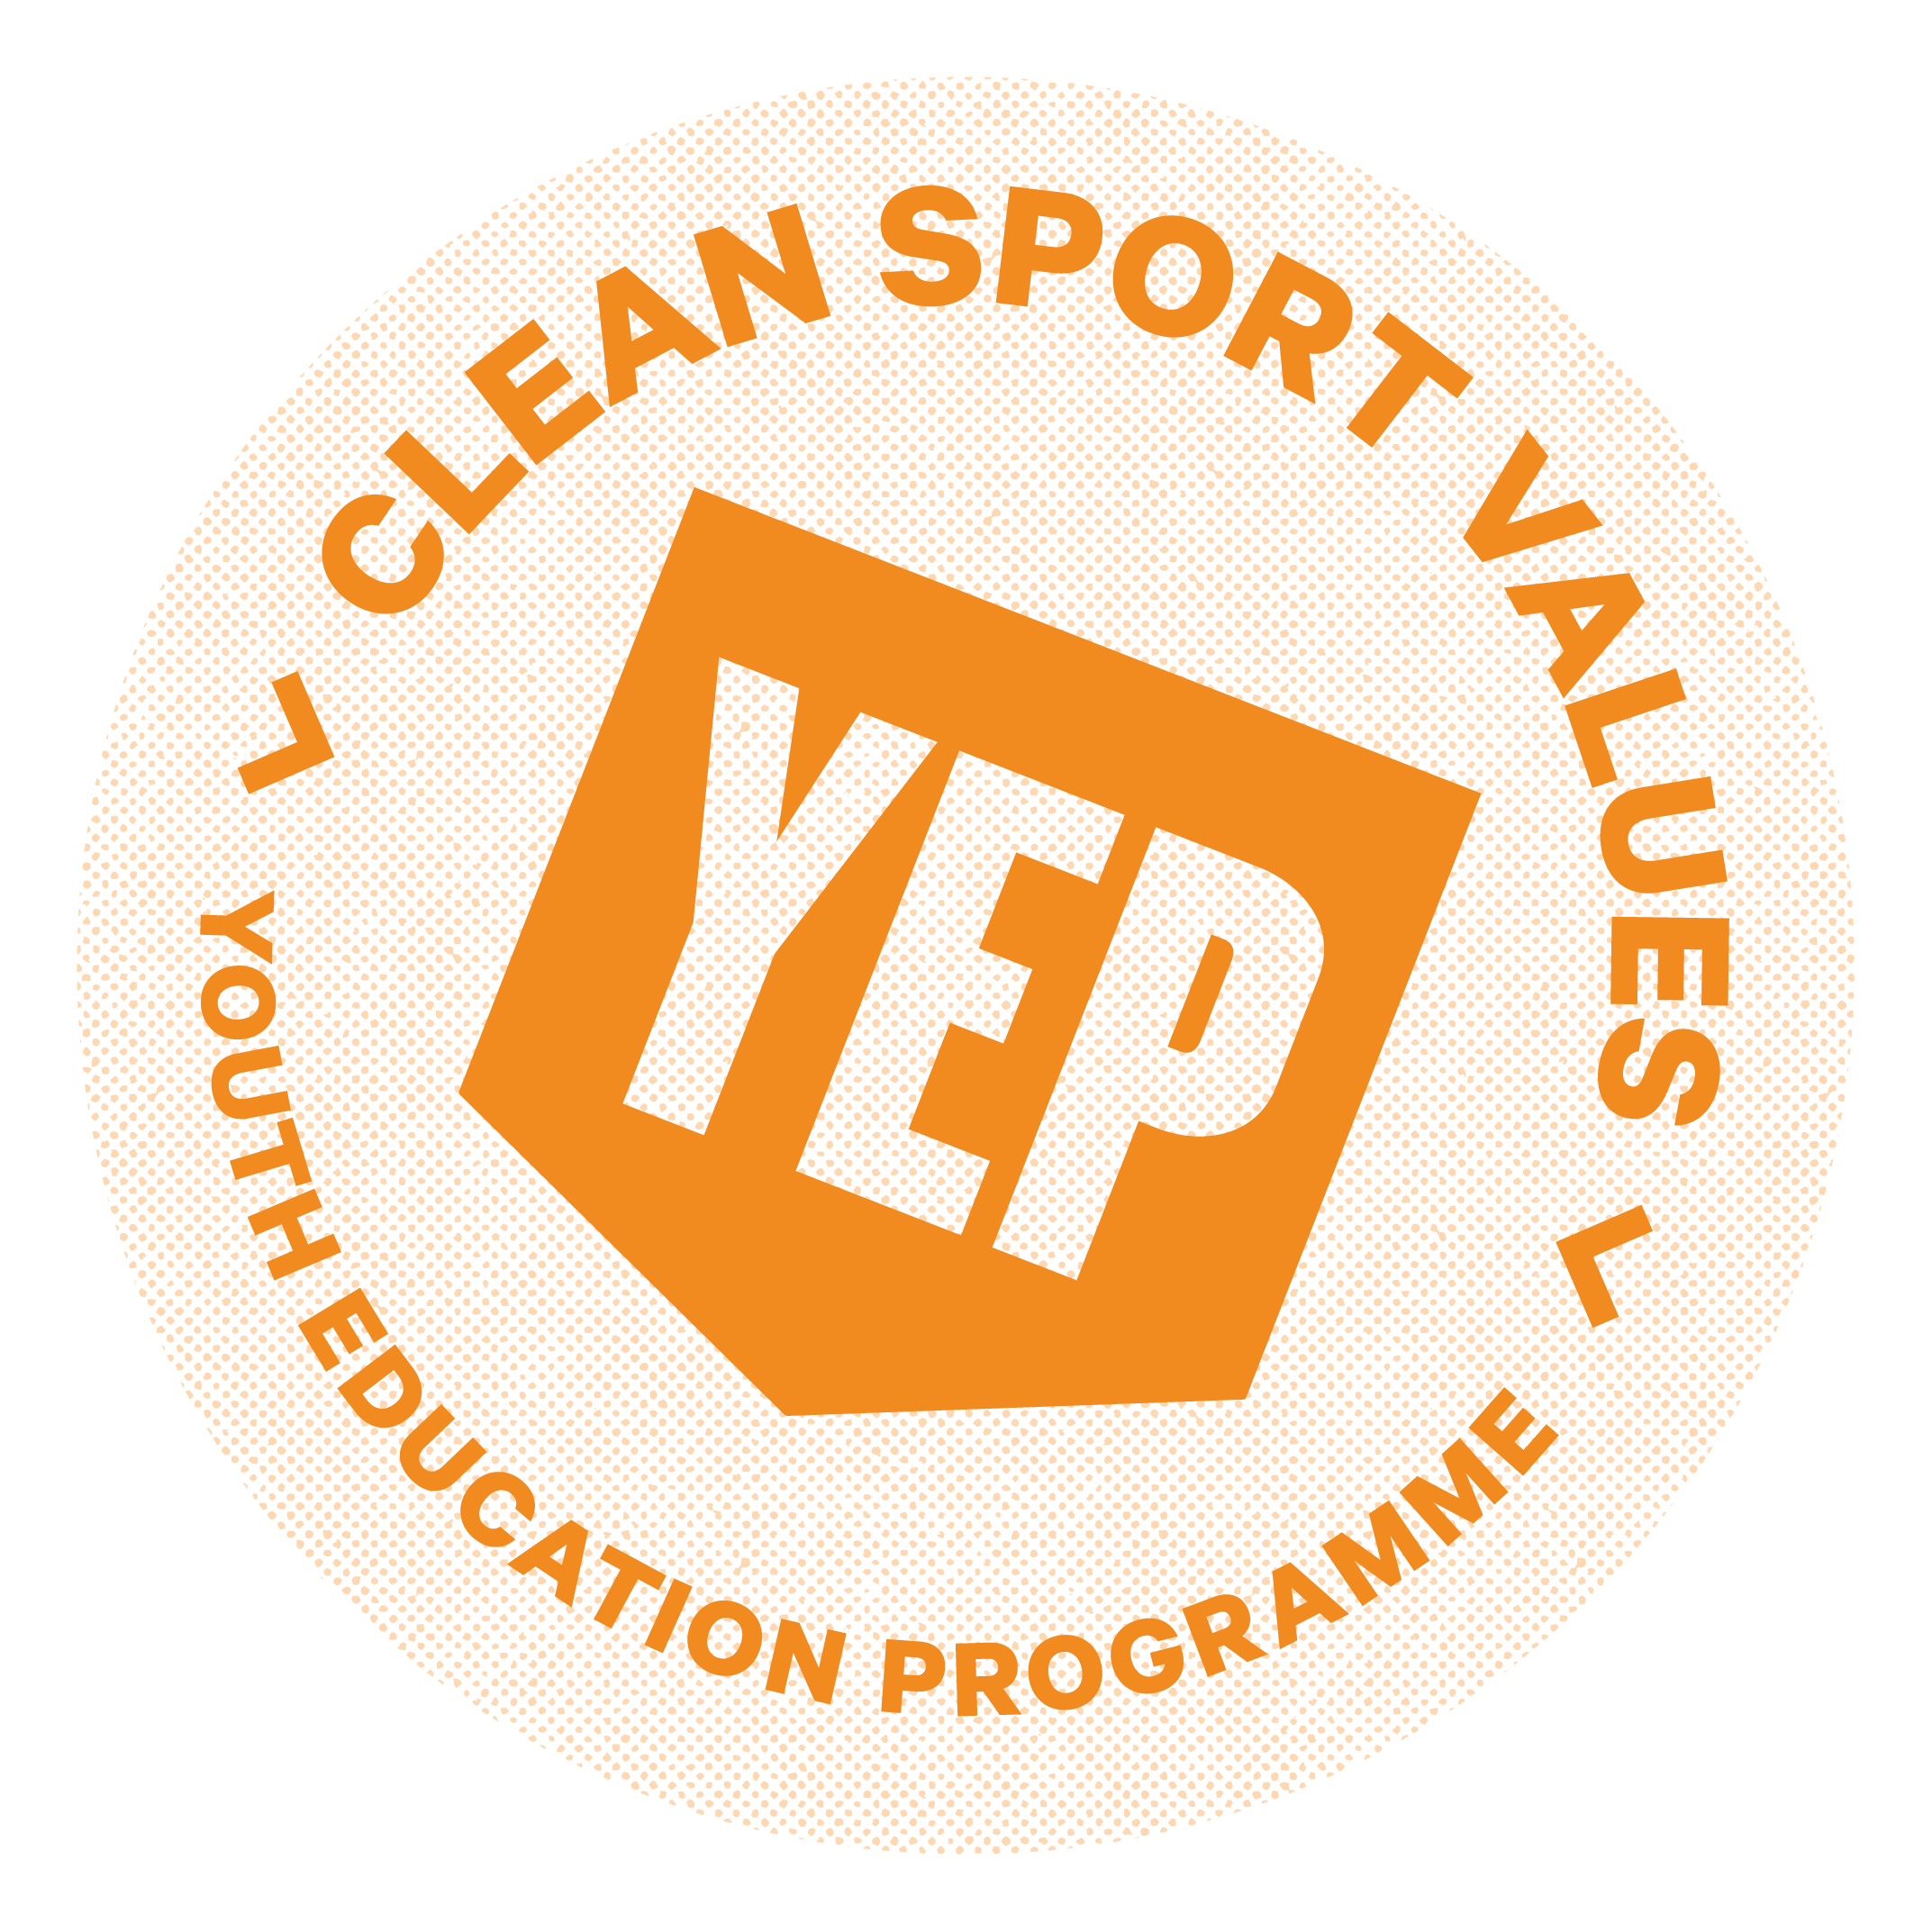 Clean Sport Values Youth Education Programme.